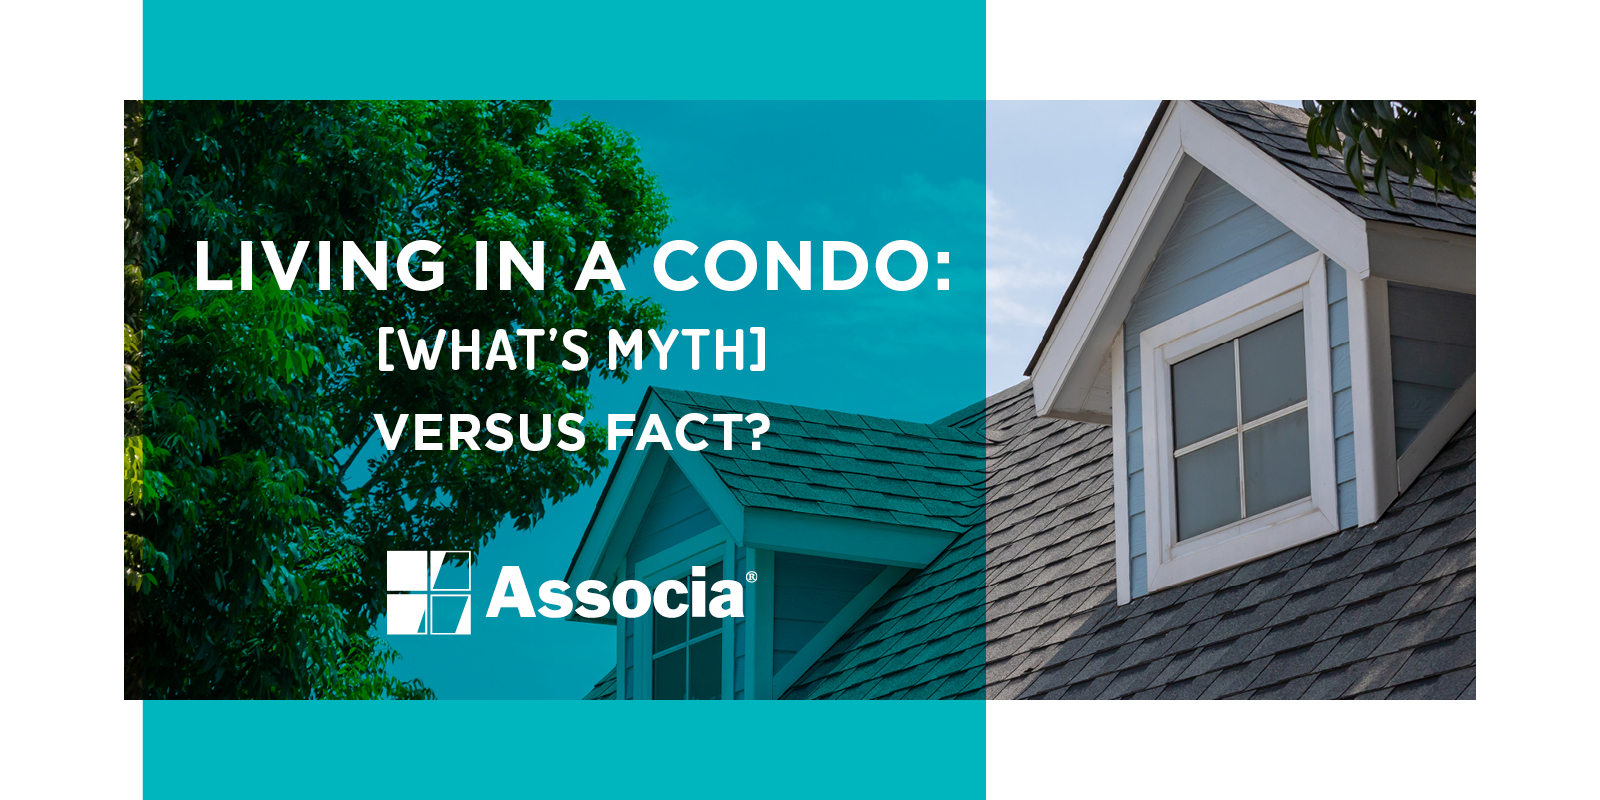 Living in a Condo: What’s Myth Versus Fact?